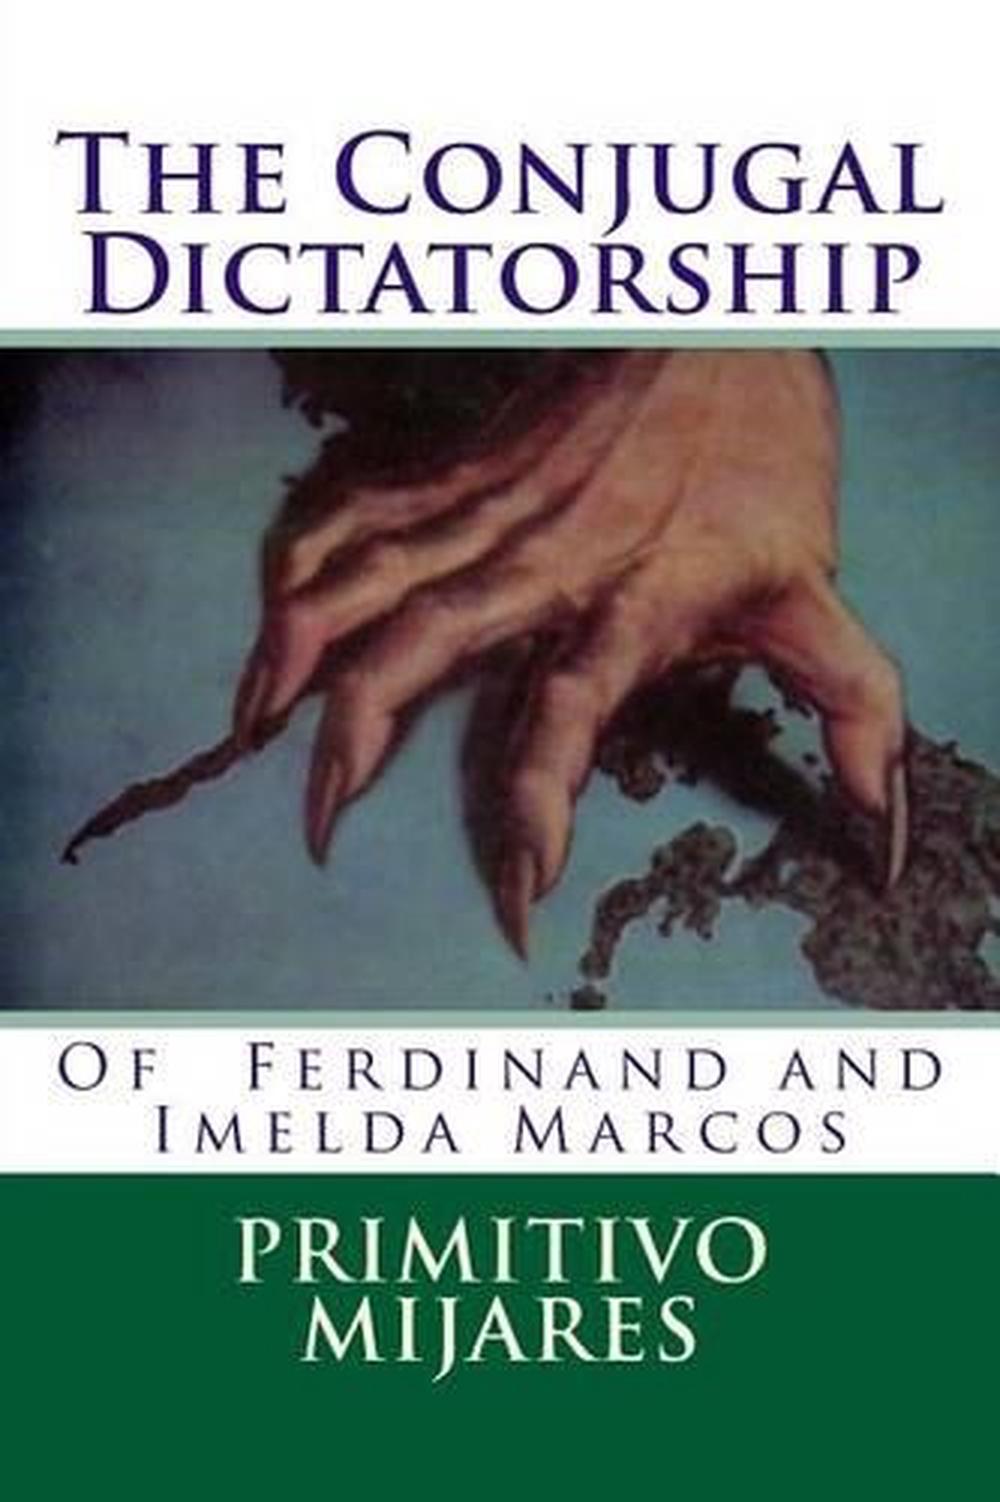 The Conjugal Dictatorship of Ferdinand and Imelda Marcos by Primitivo